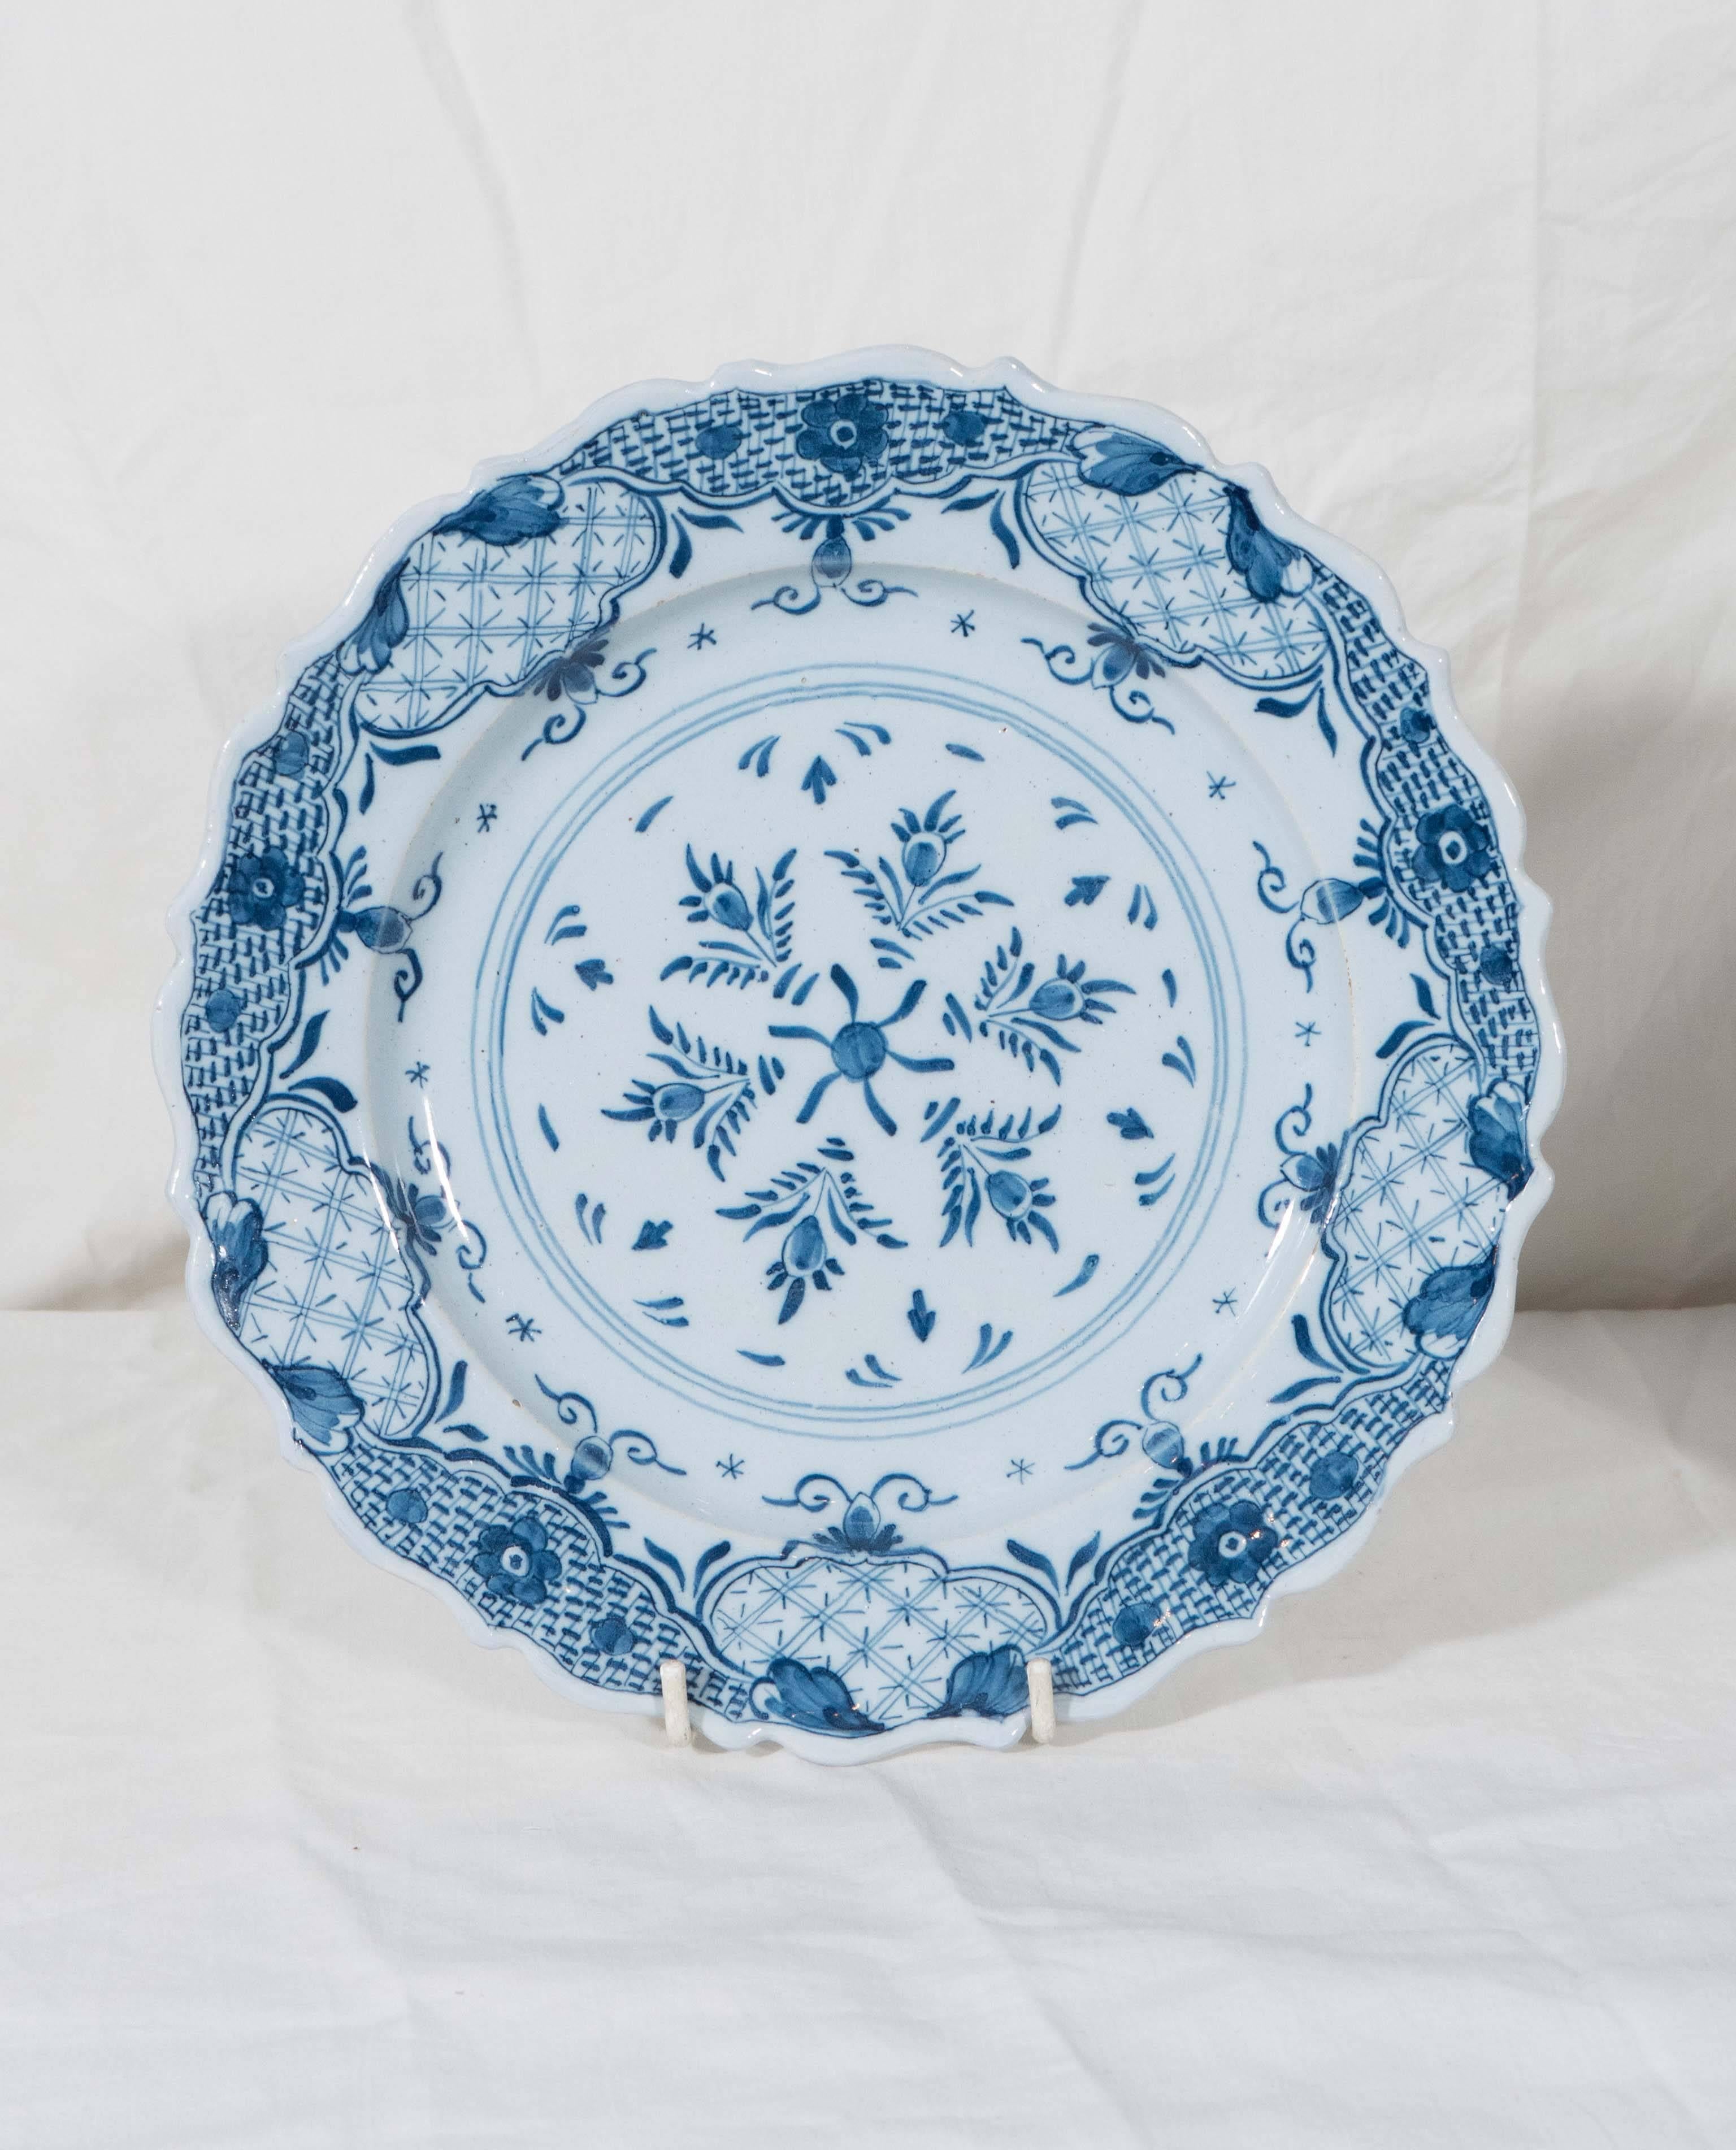 Made between 1763 and 1777 the dishes have the mark "Duijn" for Ysbrand van Duijn" owner of De Porceleyne Schotel. They are painted in soft tones of
cobalt blue. The center of each dish shows a star shape formed by six tulips. The